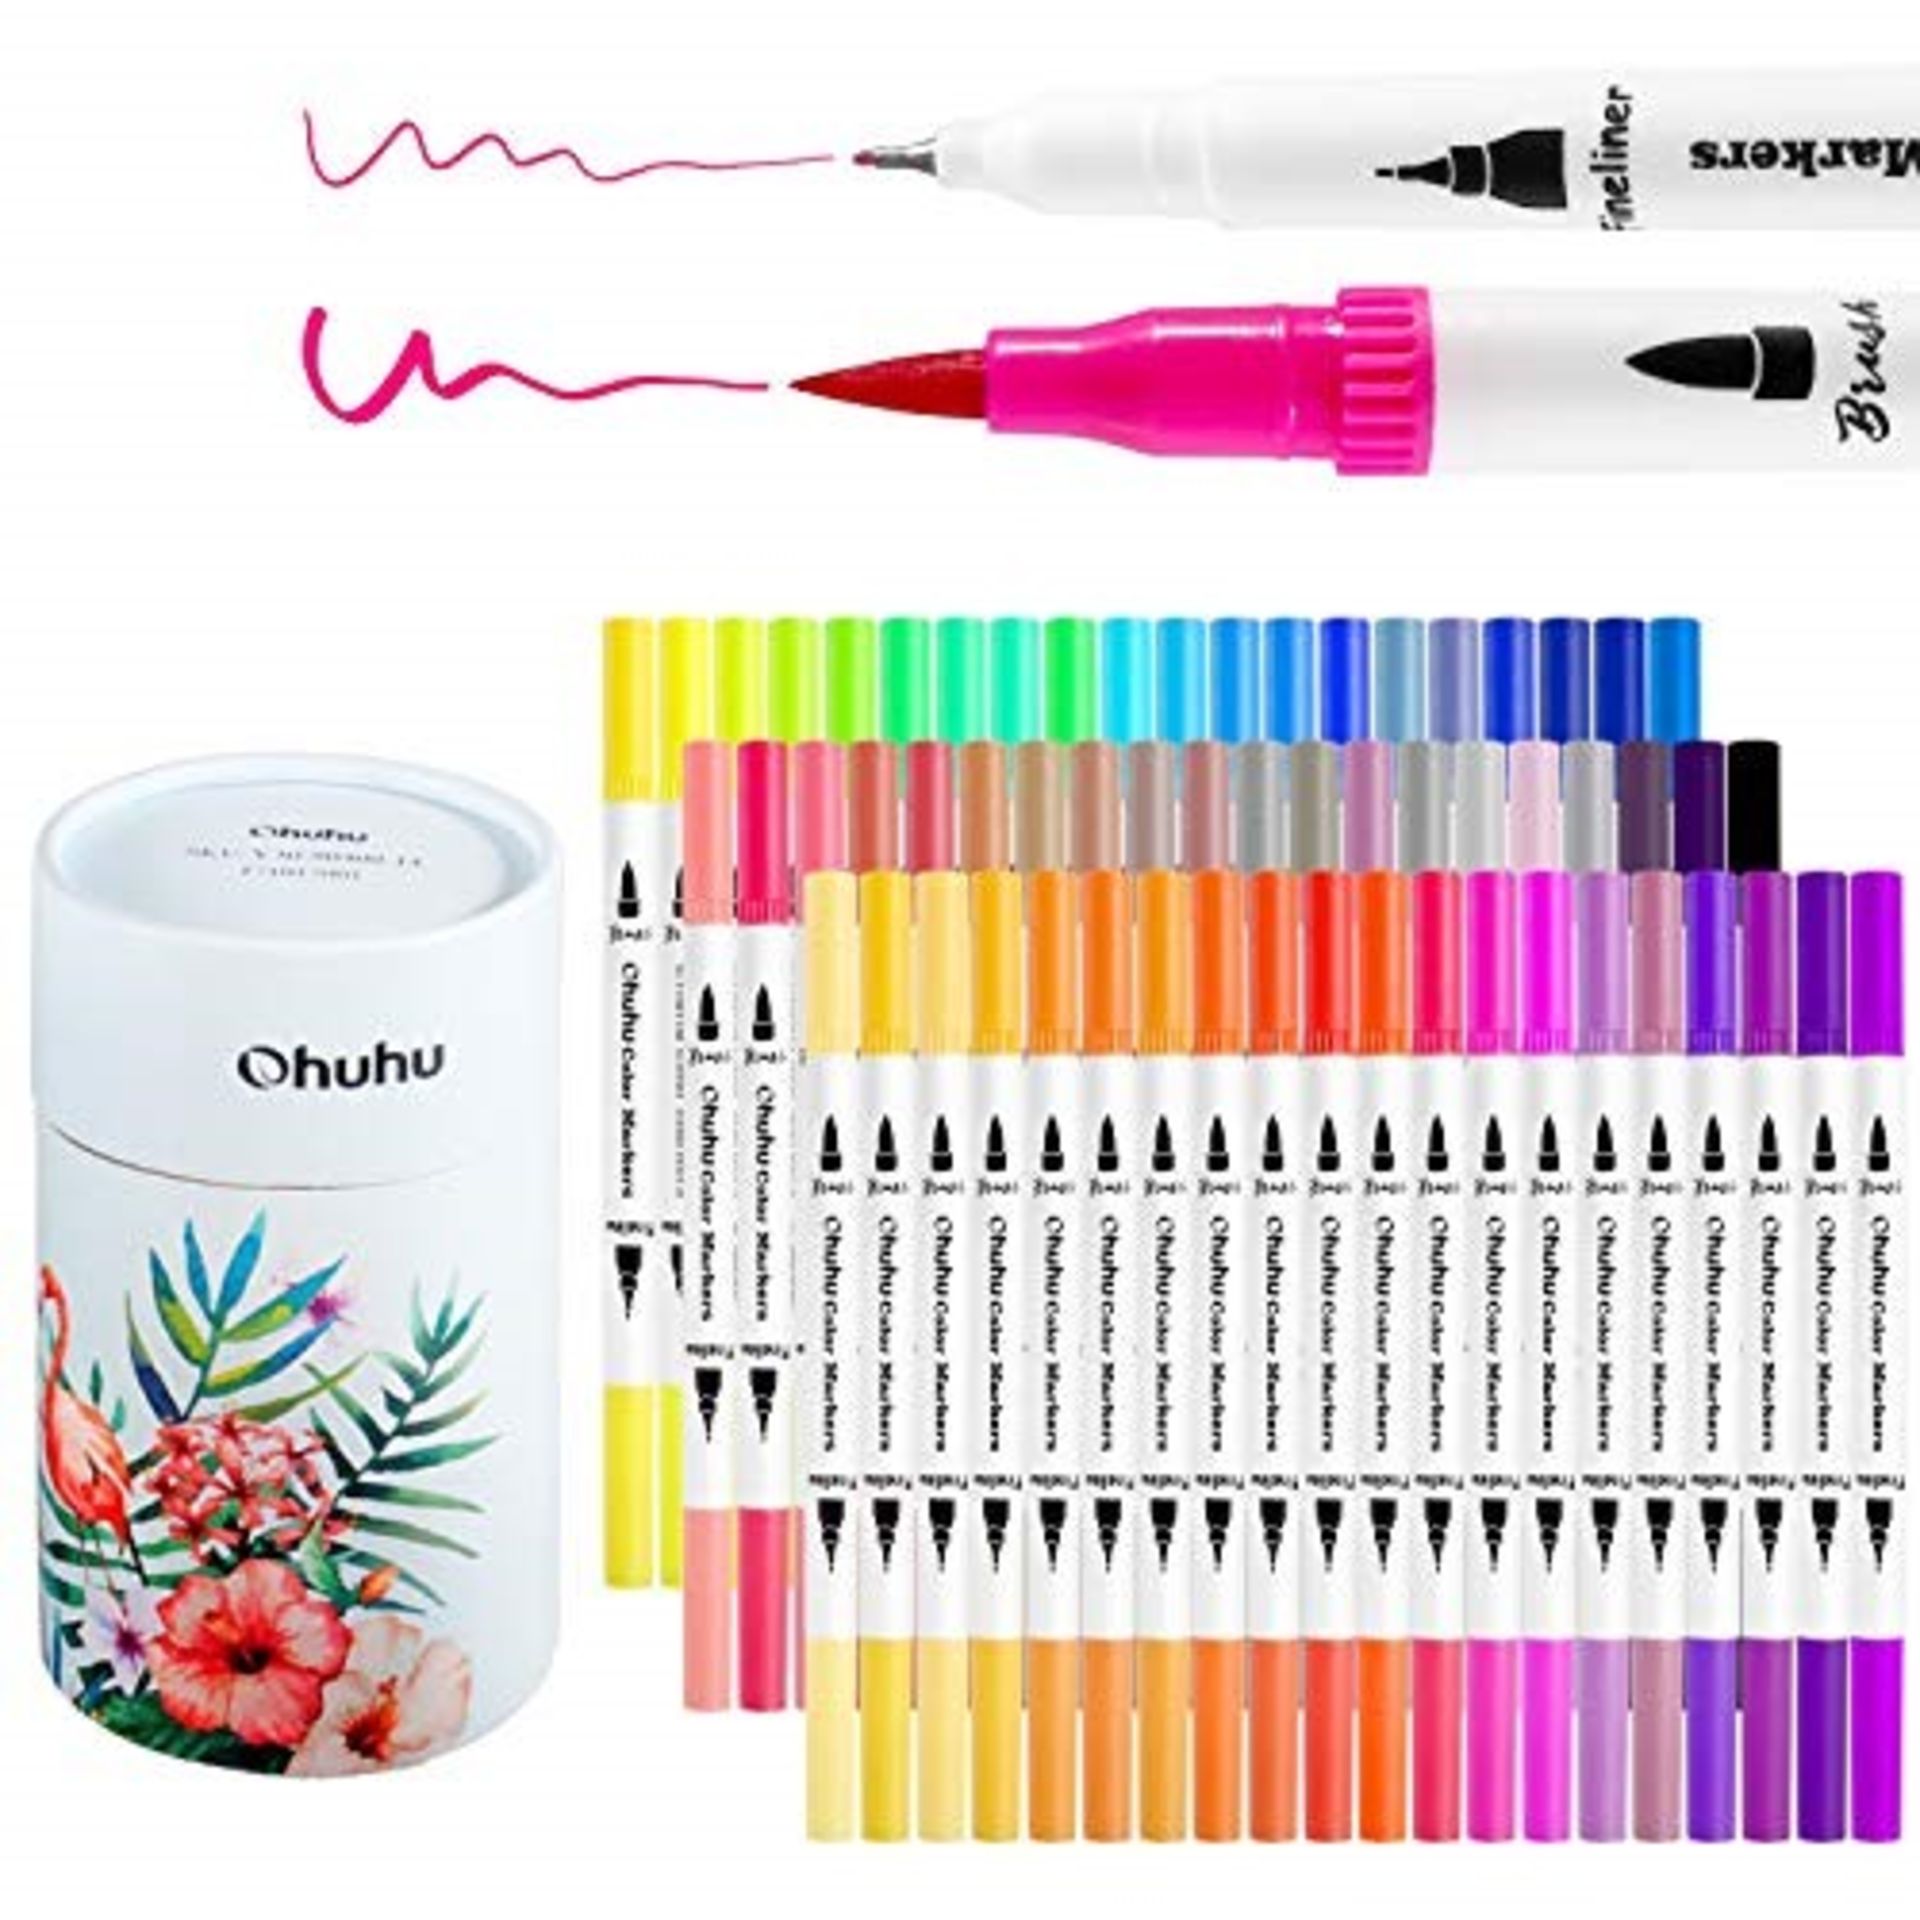 Fine and Brush Dual Tips Colouring Pens, Ohuhu 60 Watercolor Pens, Brush Fineliner Fel